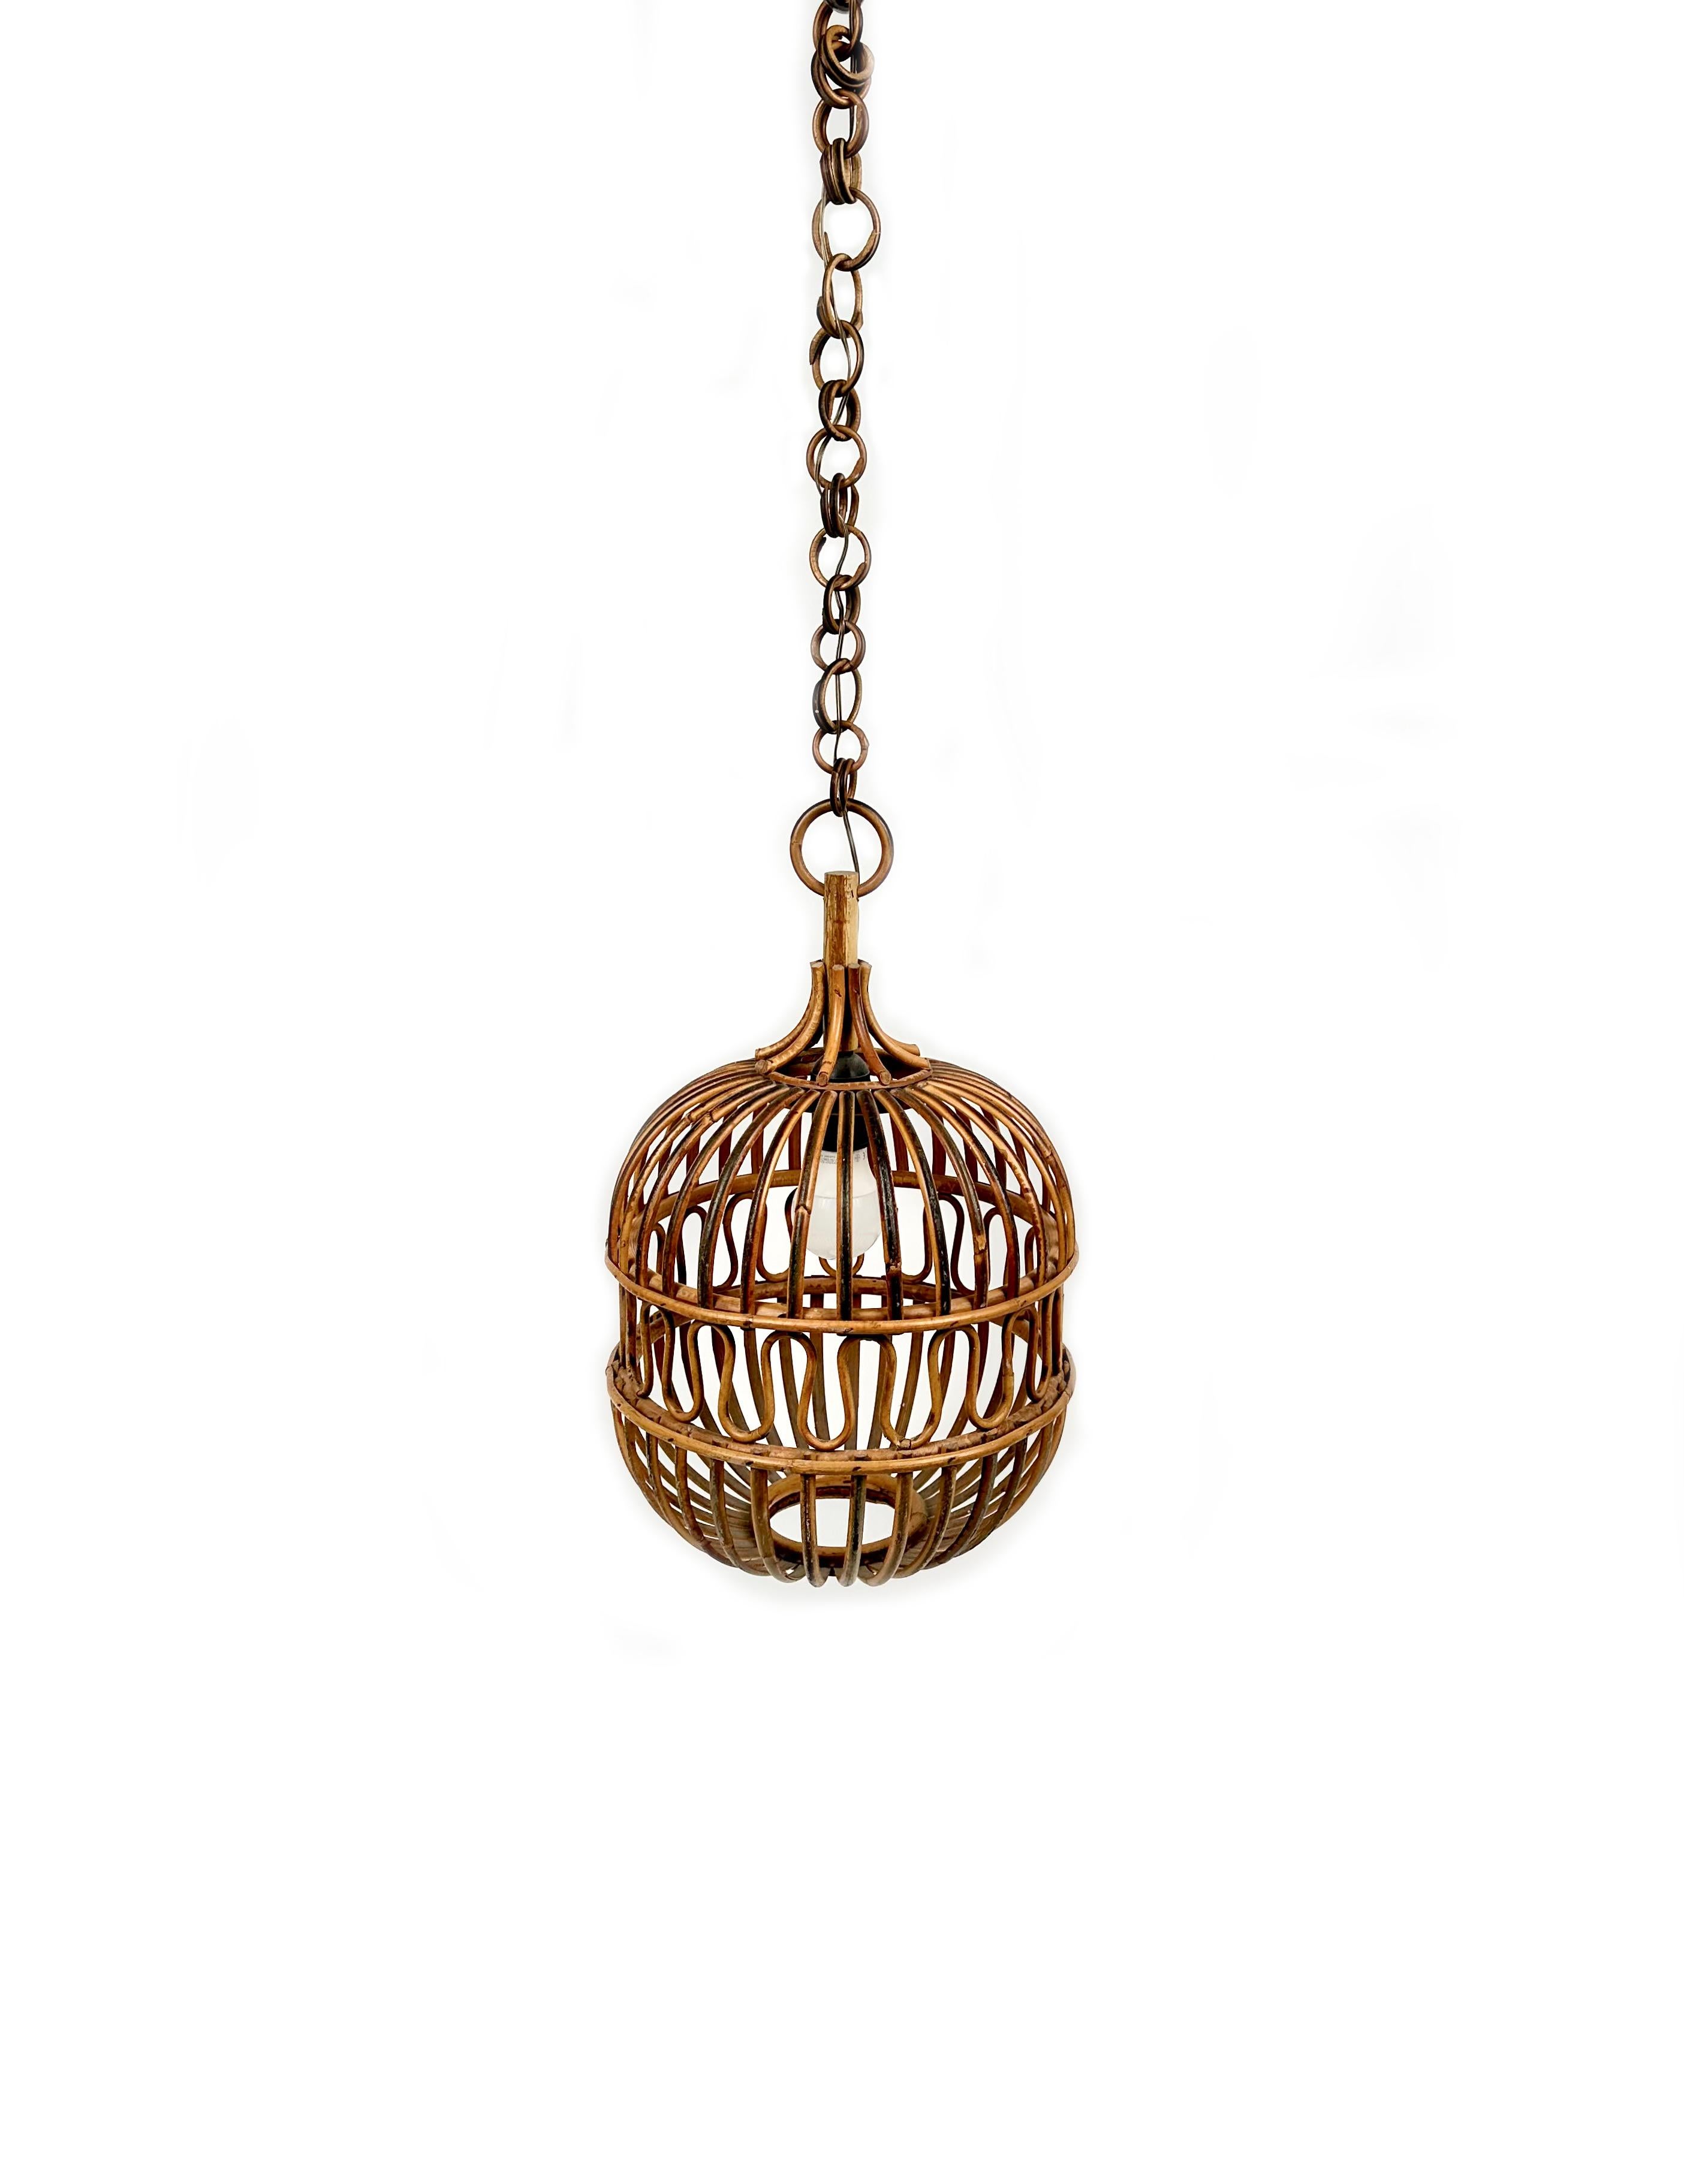 Mid-Century Modern Midcentury Chandelier in Rattan and Bamboo, Italy, 1960s For Sale